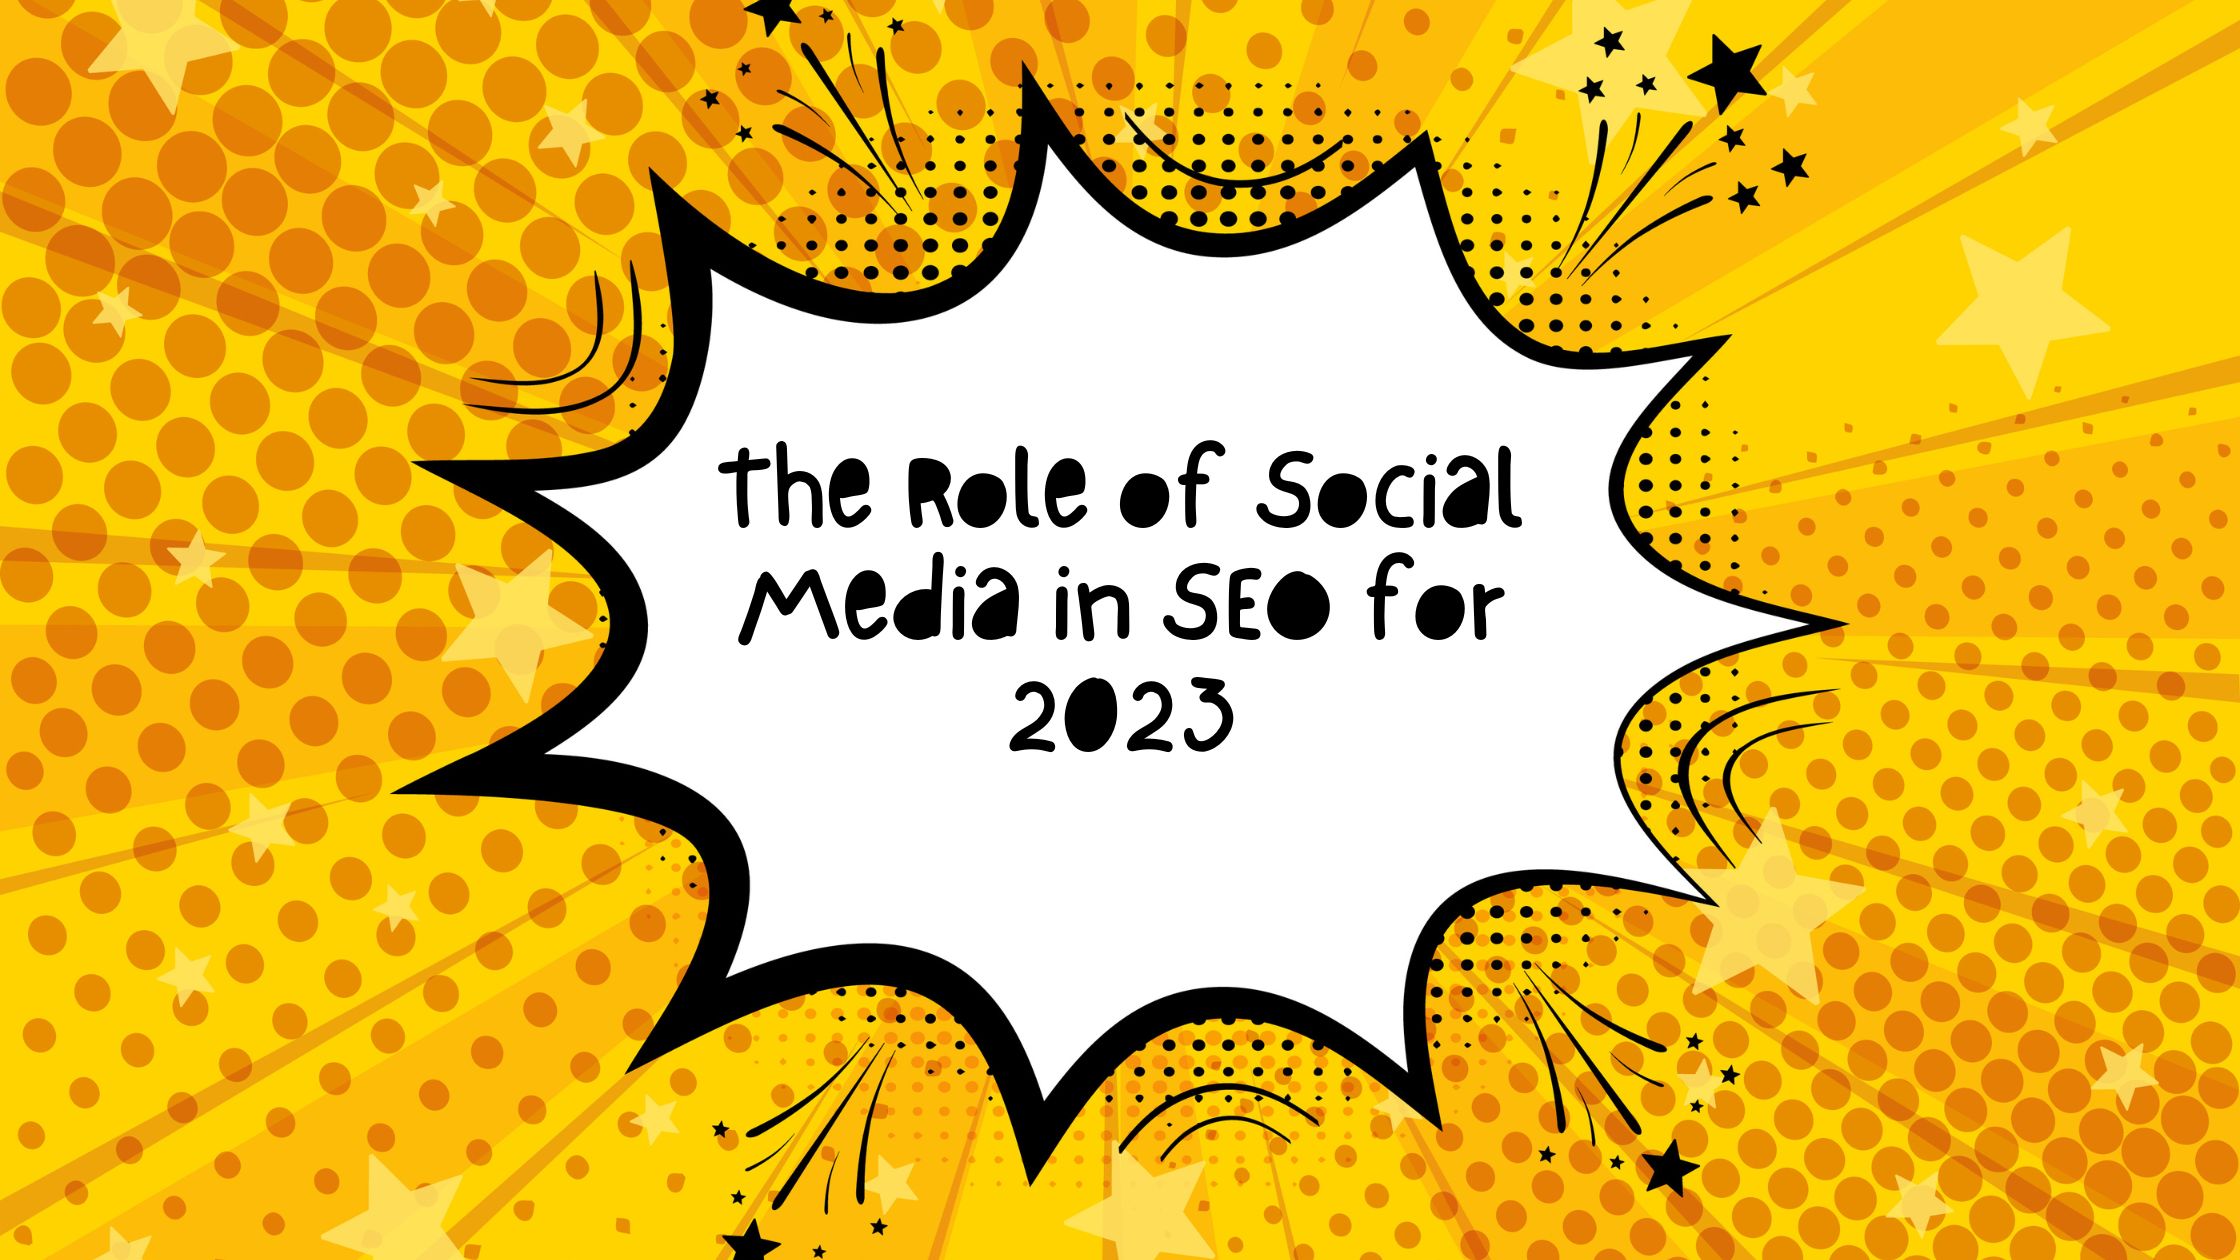 The Role of Social Media in SEO for 2023